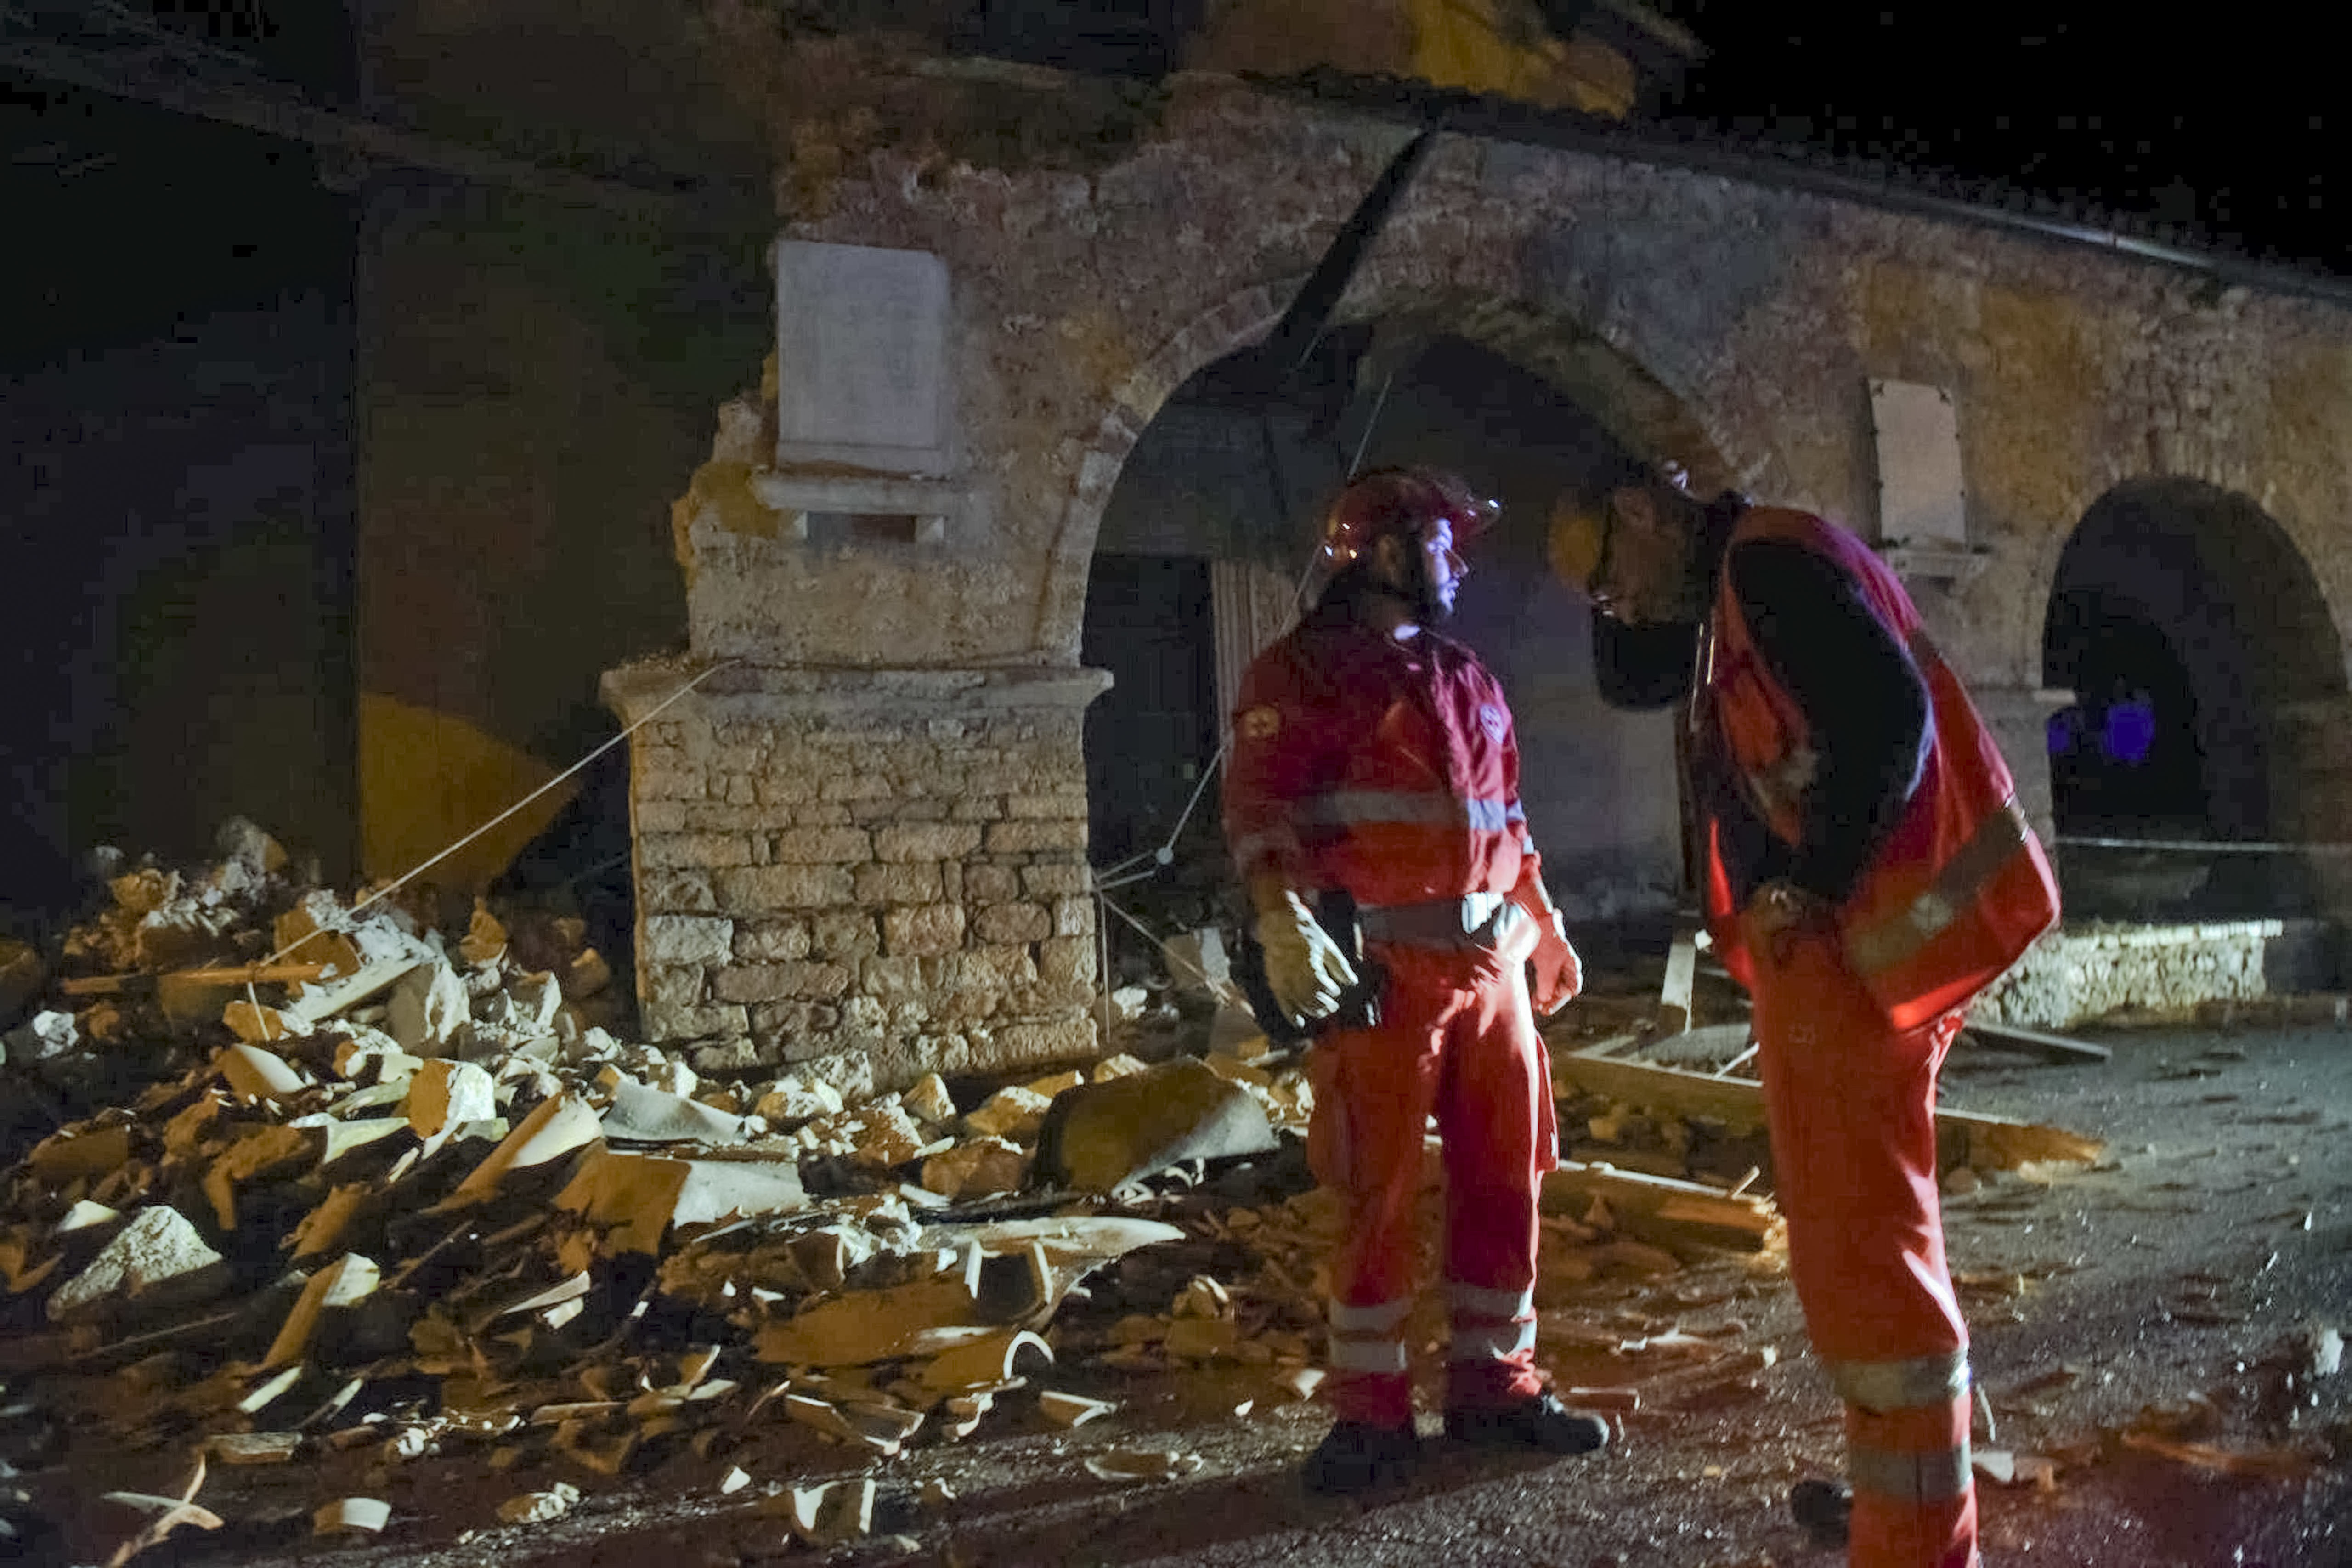 Structures fall as magnitude 6.1 and 5.5 aftershocks rock Italian